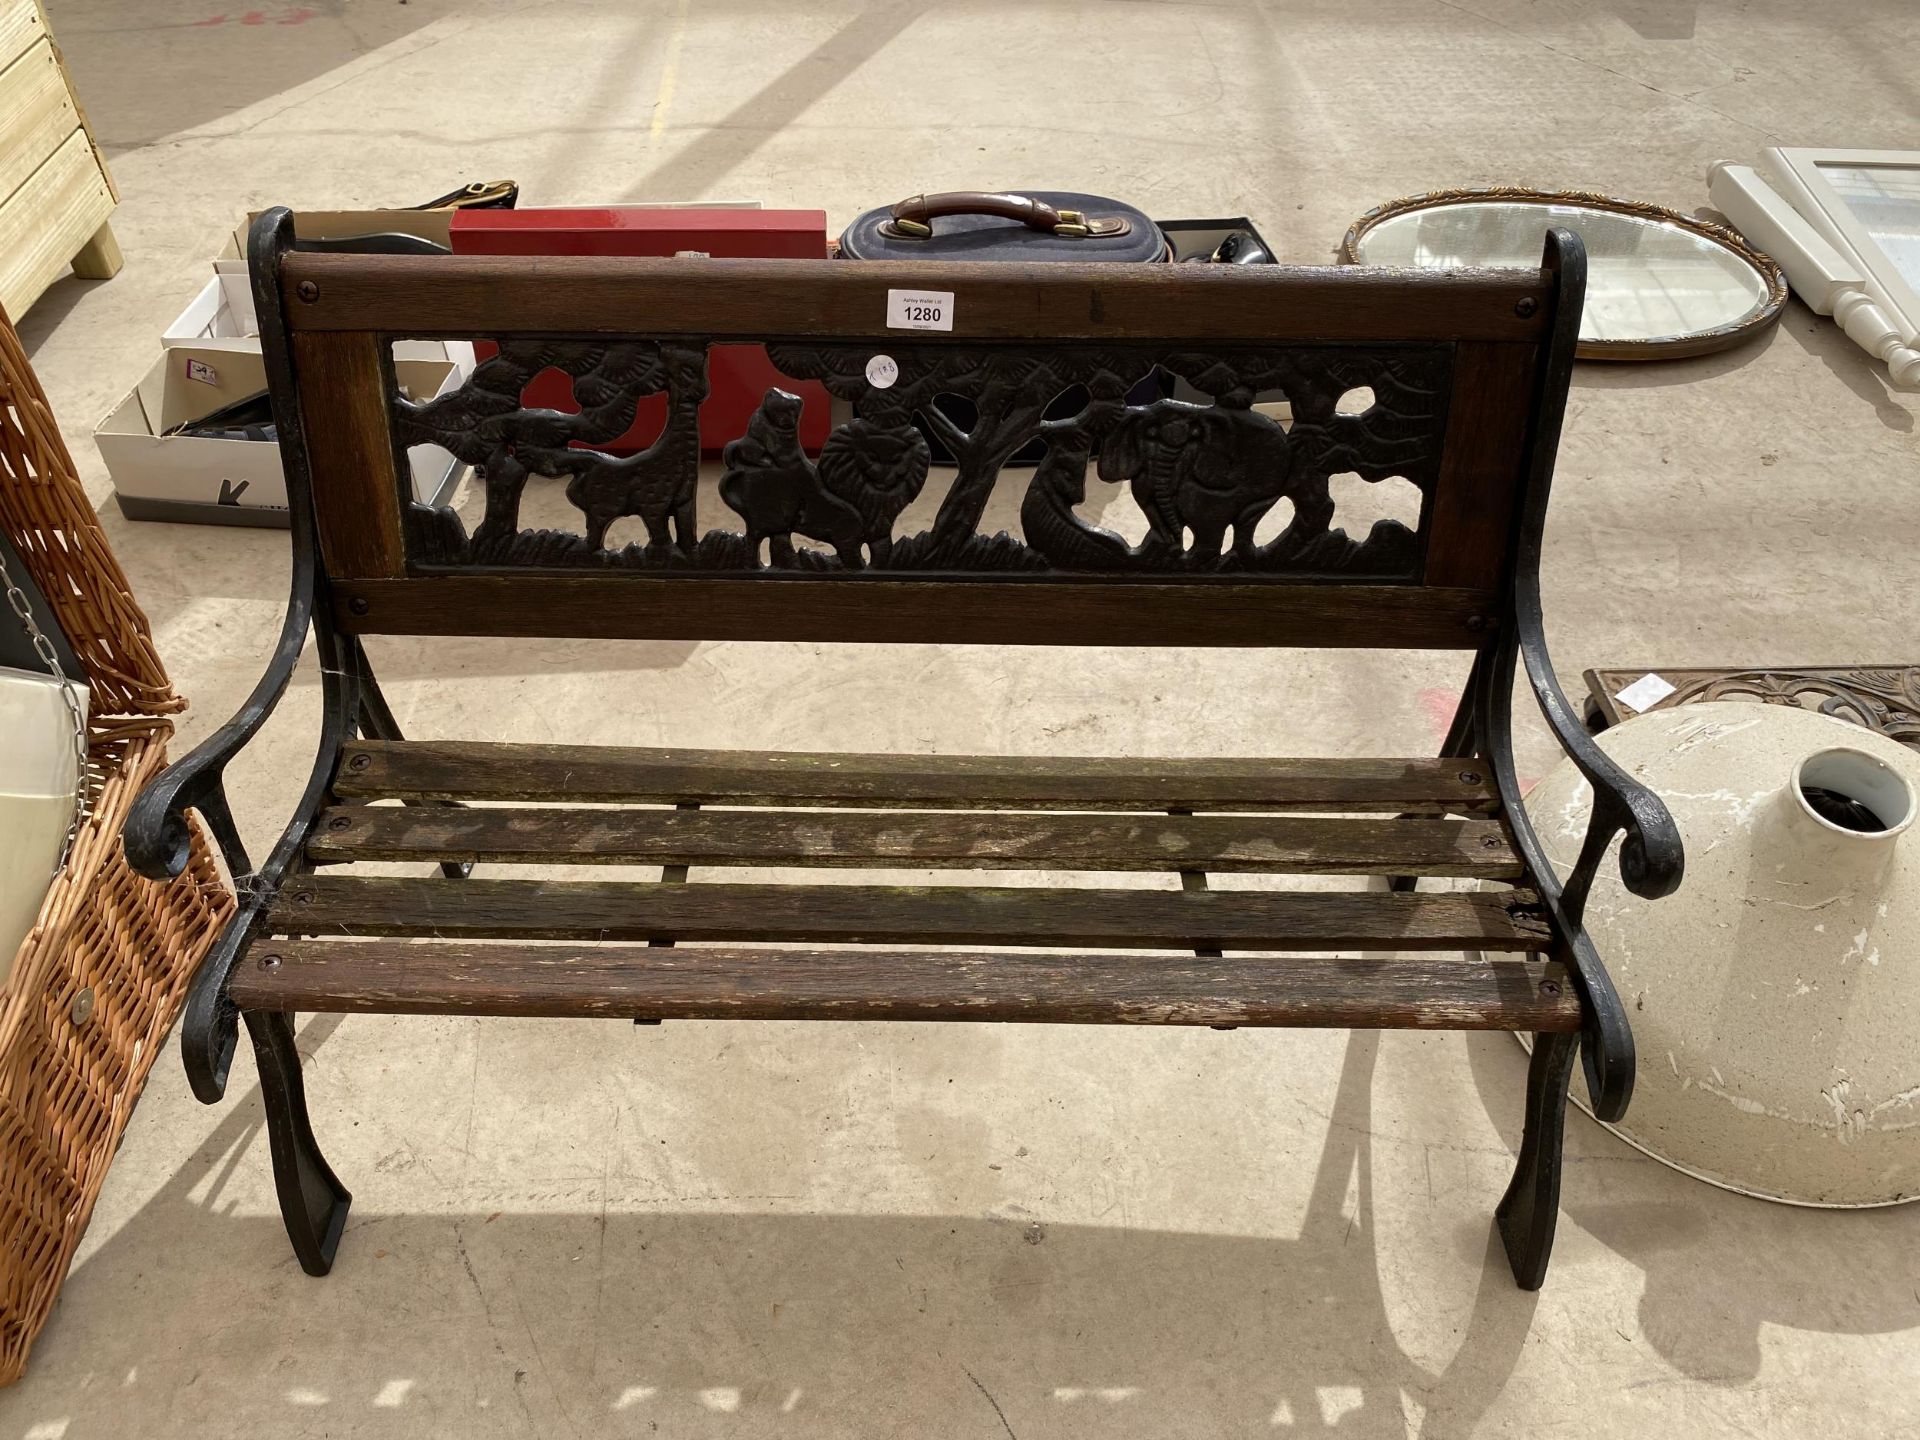 A SMALL CHILDRENS GARDEN BENCH WITH CAST BENCH ENDS AND A CAST BACK DEPICTING A SAFARI SCENE